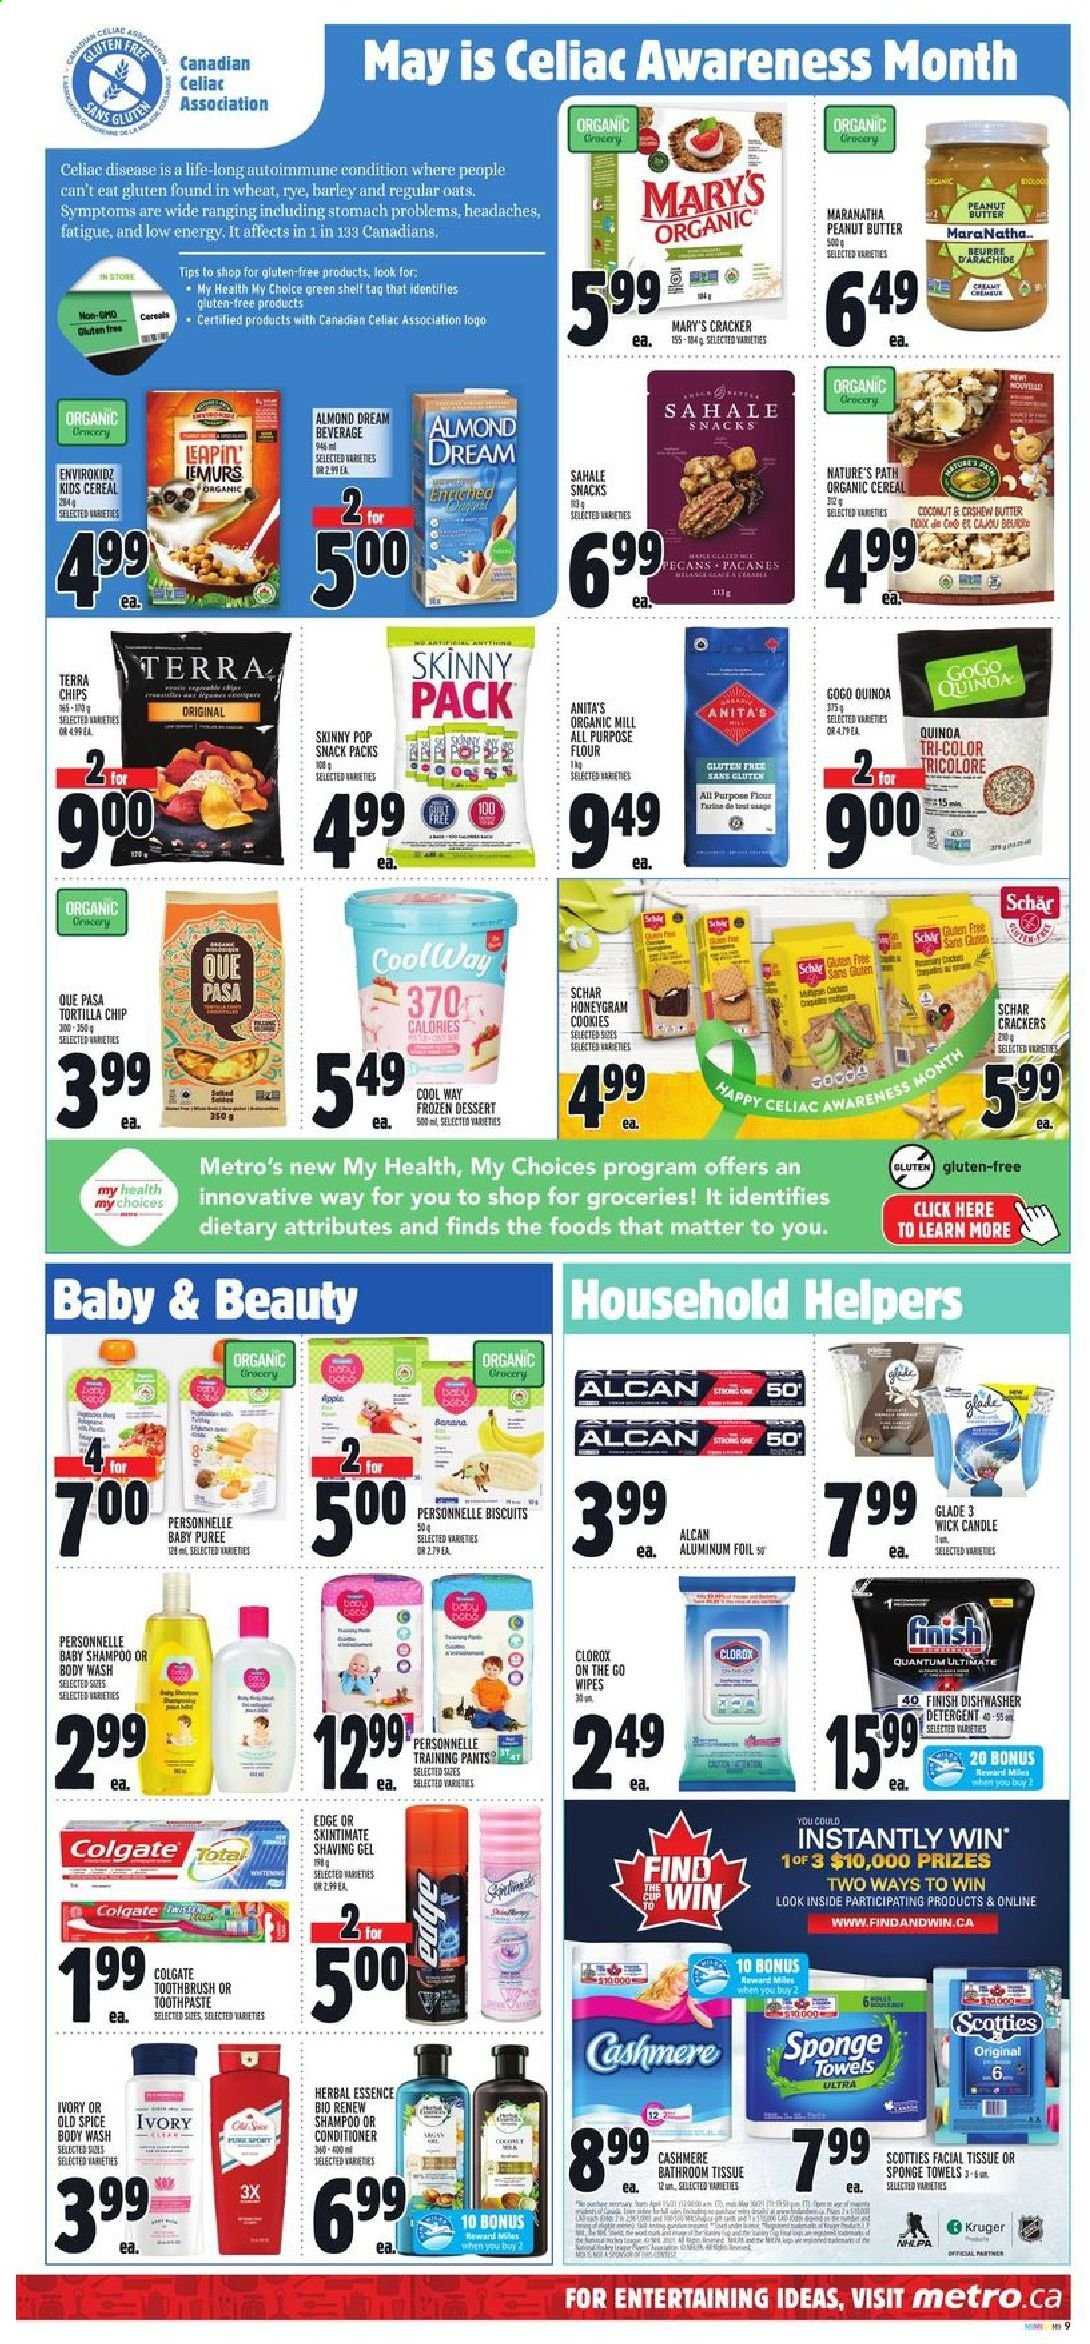 thumbnail - Metro Flyer - May 13, 2021 - May 19, 2021 - Sales products - tortillas, cookies, snack, crackers, biscuit, Skinny Pop, all purpose flour, oats, cereals, spice, peanut butter, pecans, sake, wipes, pants, baby pants, bath tissue, Clorox, body wash, toothbrush, toothpaste, conditioner, sponge, aluminium foil, candle, Glade, towel, quinoa, shampoo, Old Spice. Page 12.